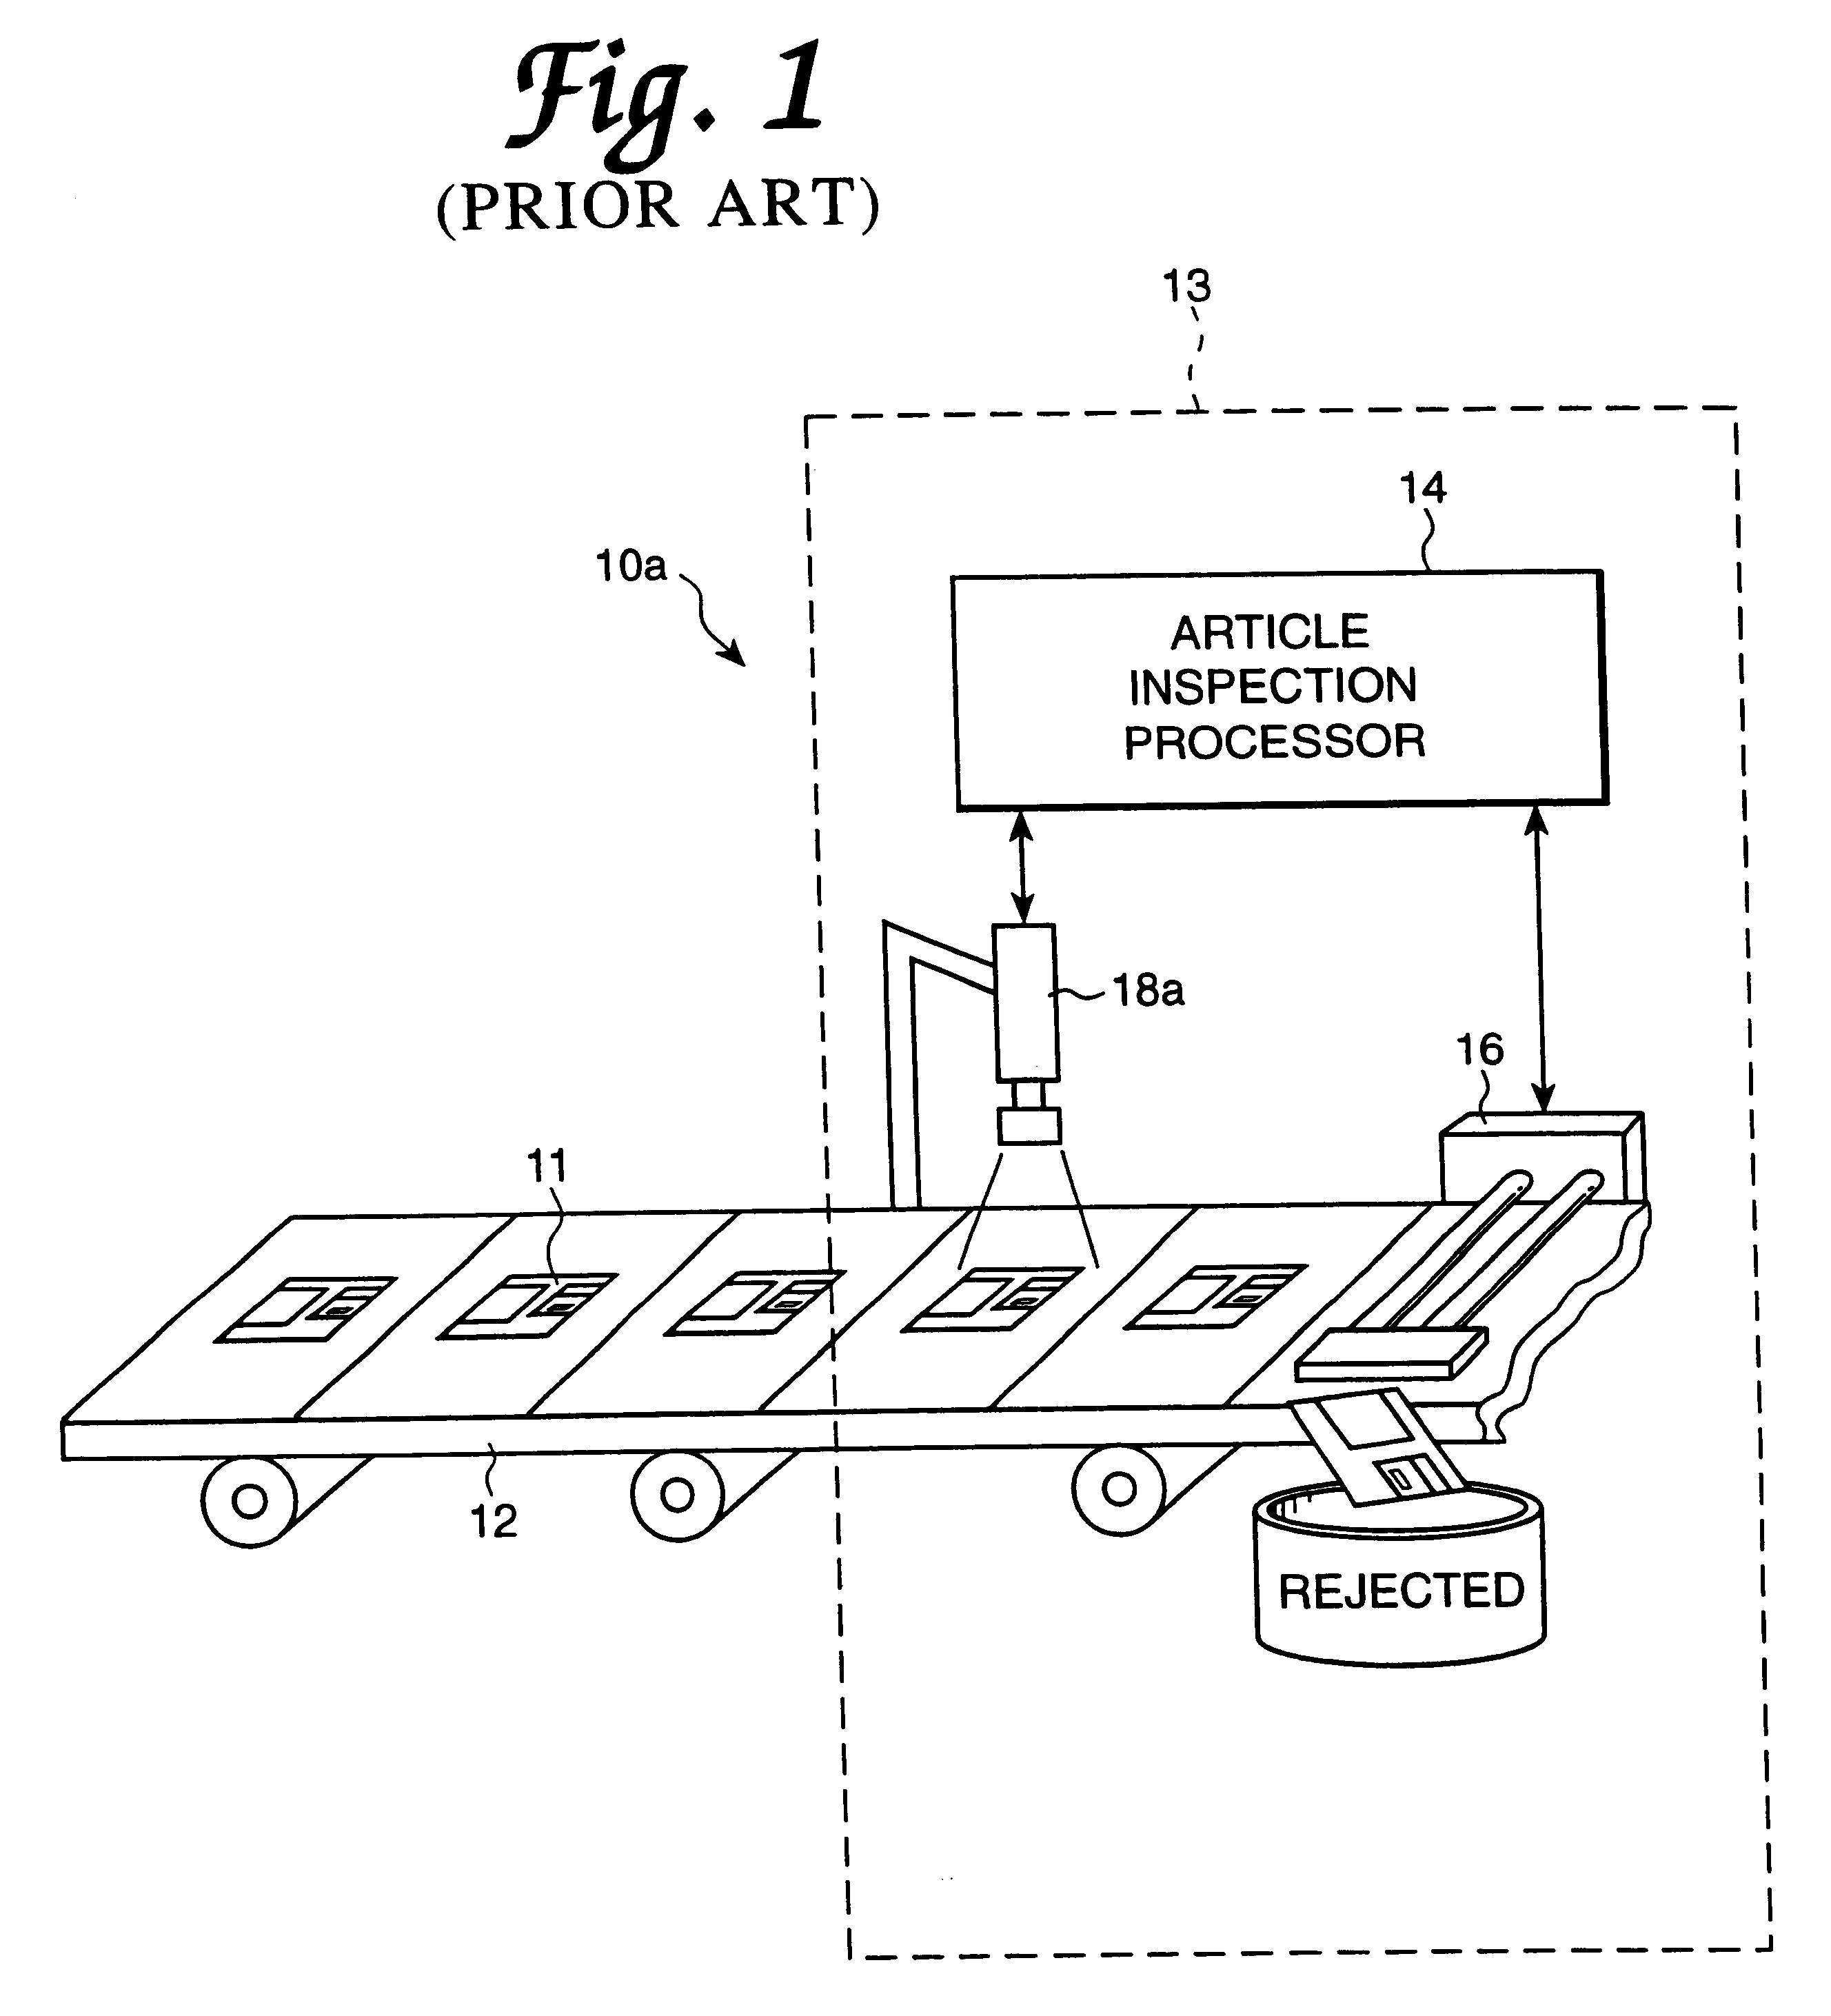 Machine vision system for identifying and assessing features of an article